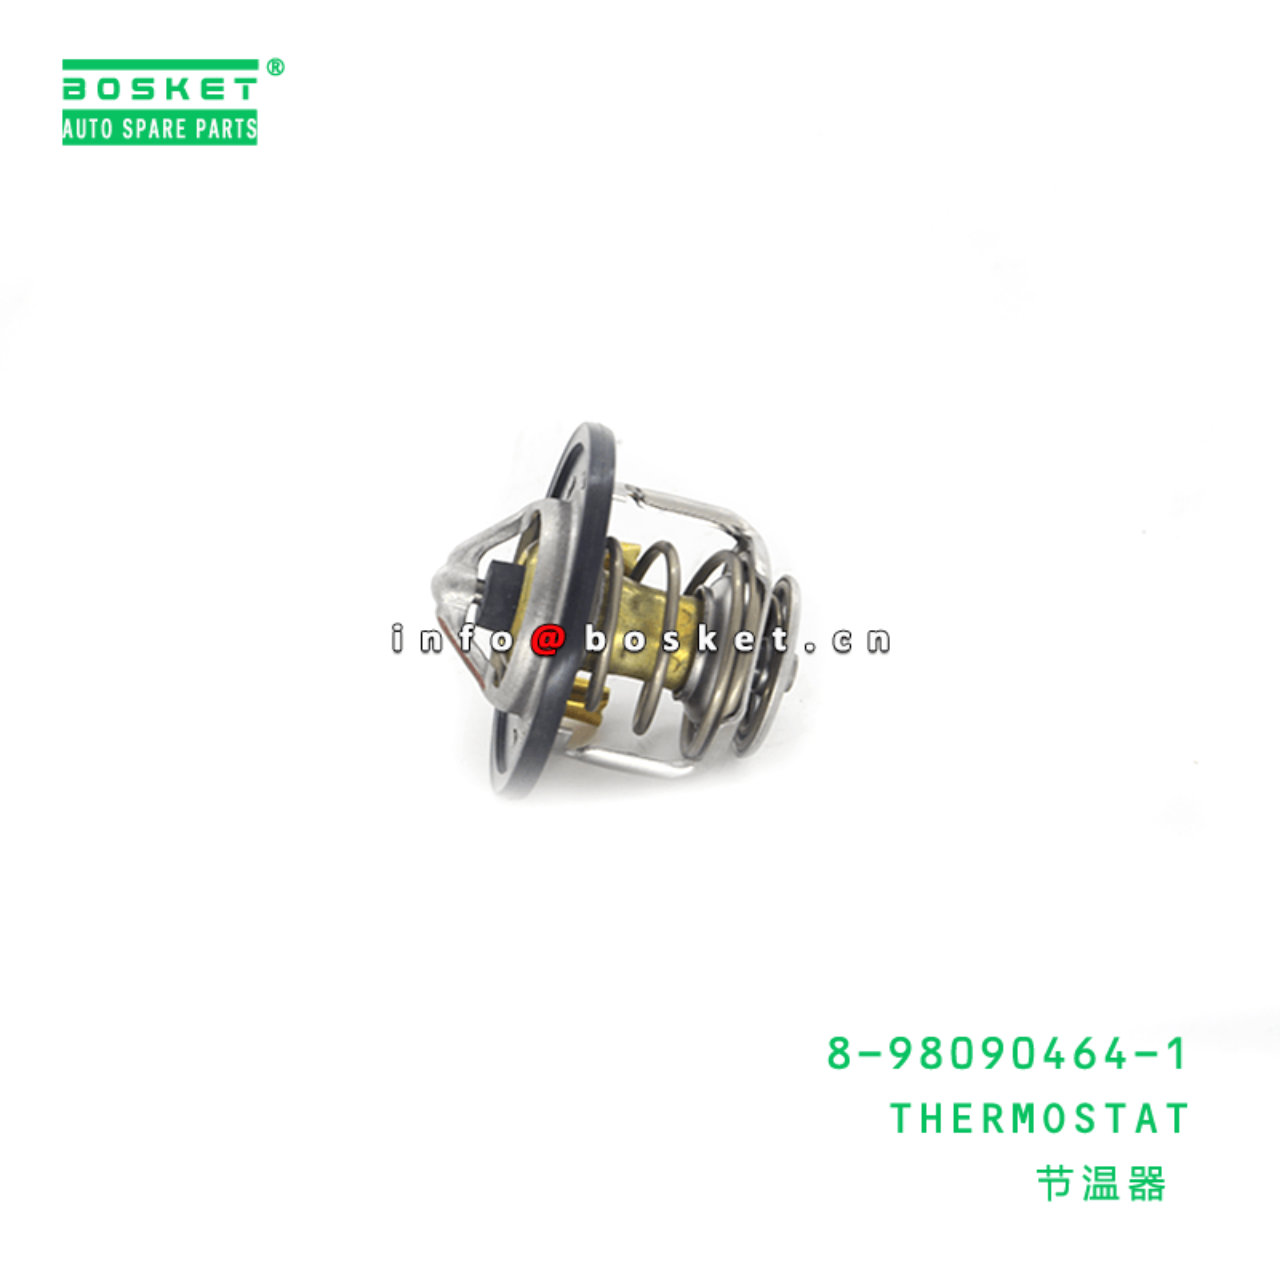 8-98090464-1 Thermostat 8980904641 Suitable for ISUZU XE 6HK1